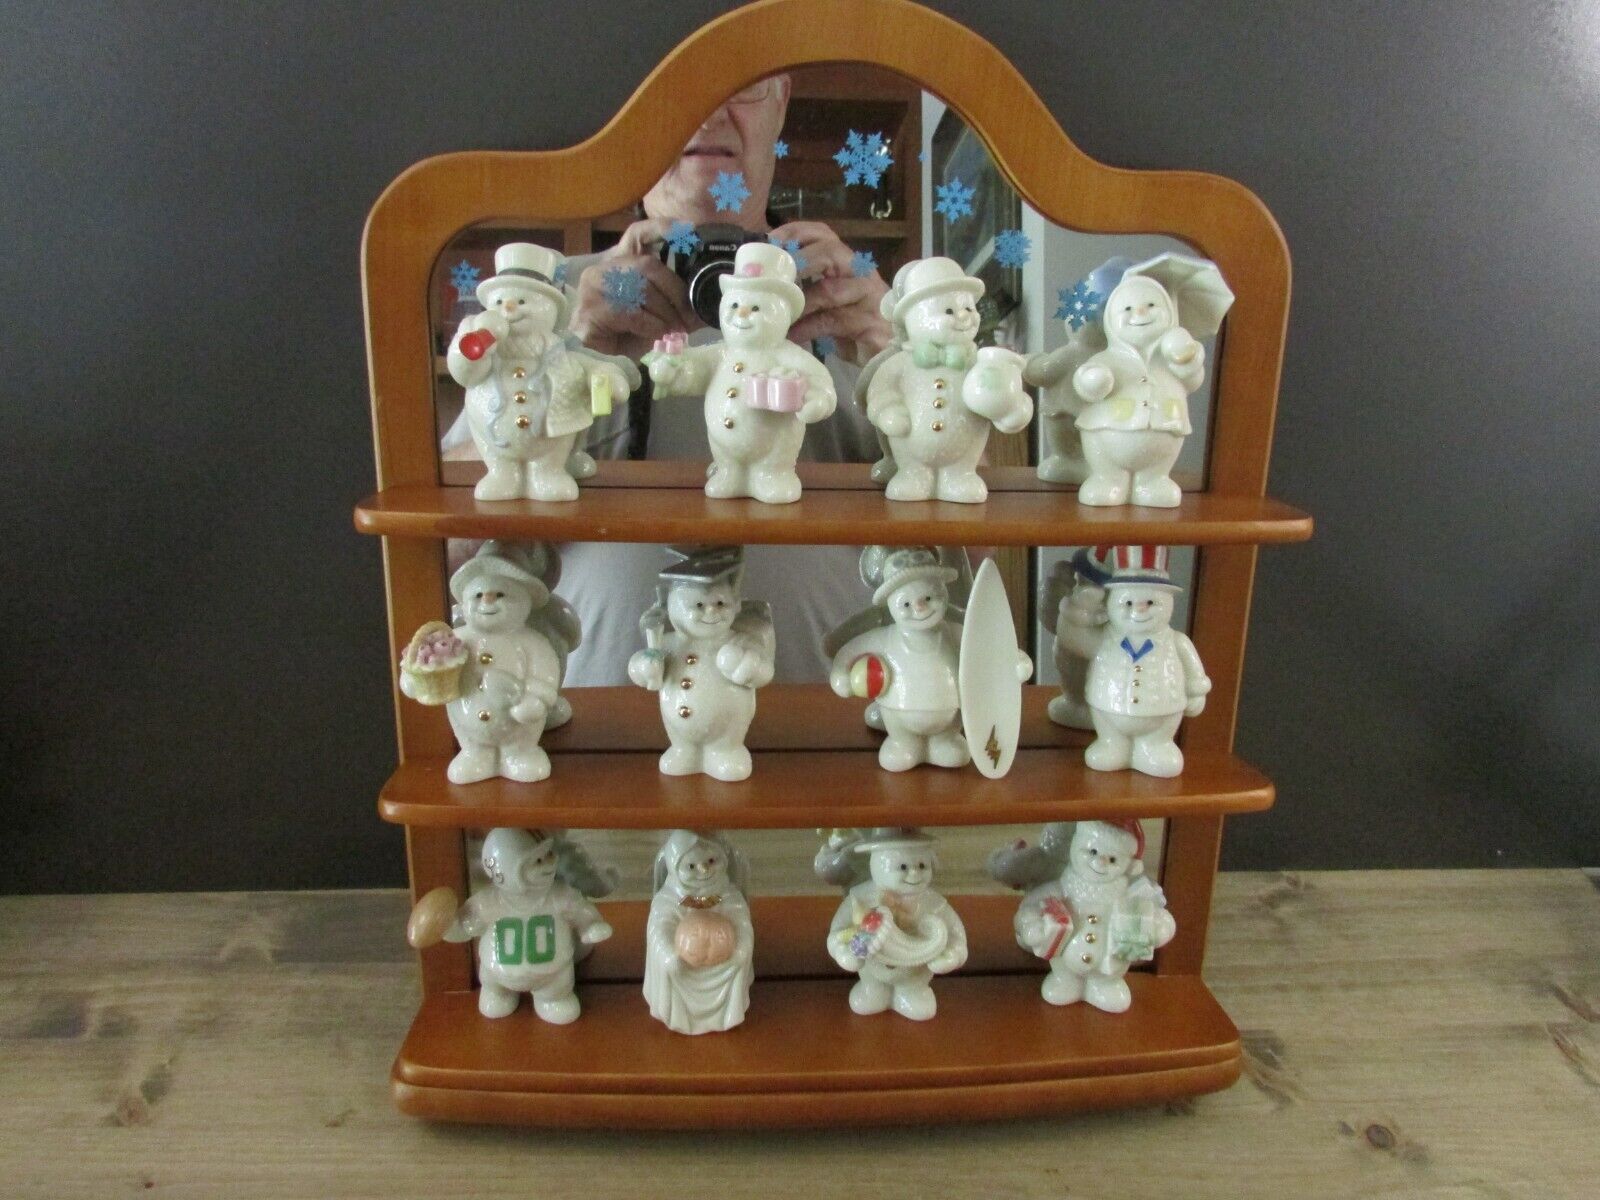 Retired 2000 Lenox 12 Months of Snowmen Figurines Monthly Occasions with Shelf